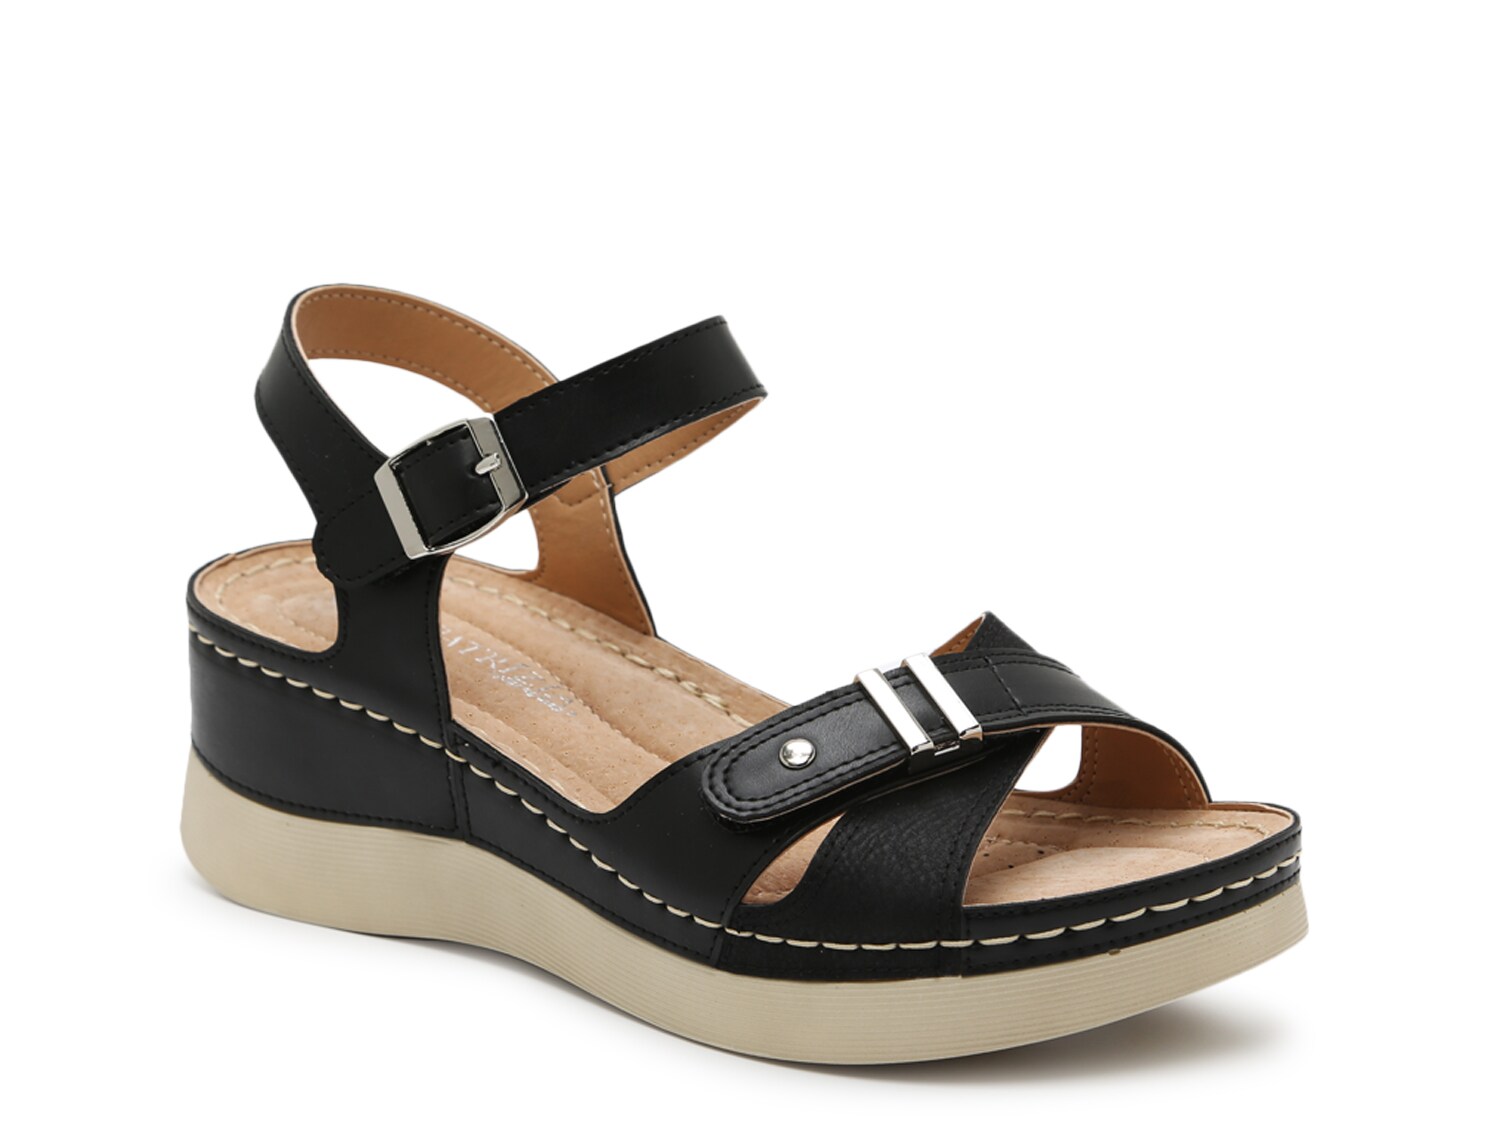 Patrizia by Spring Step Cirielle Wedge Sandal - Free Shipping | DSW